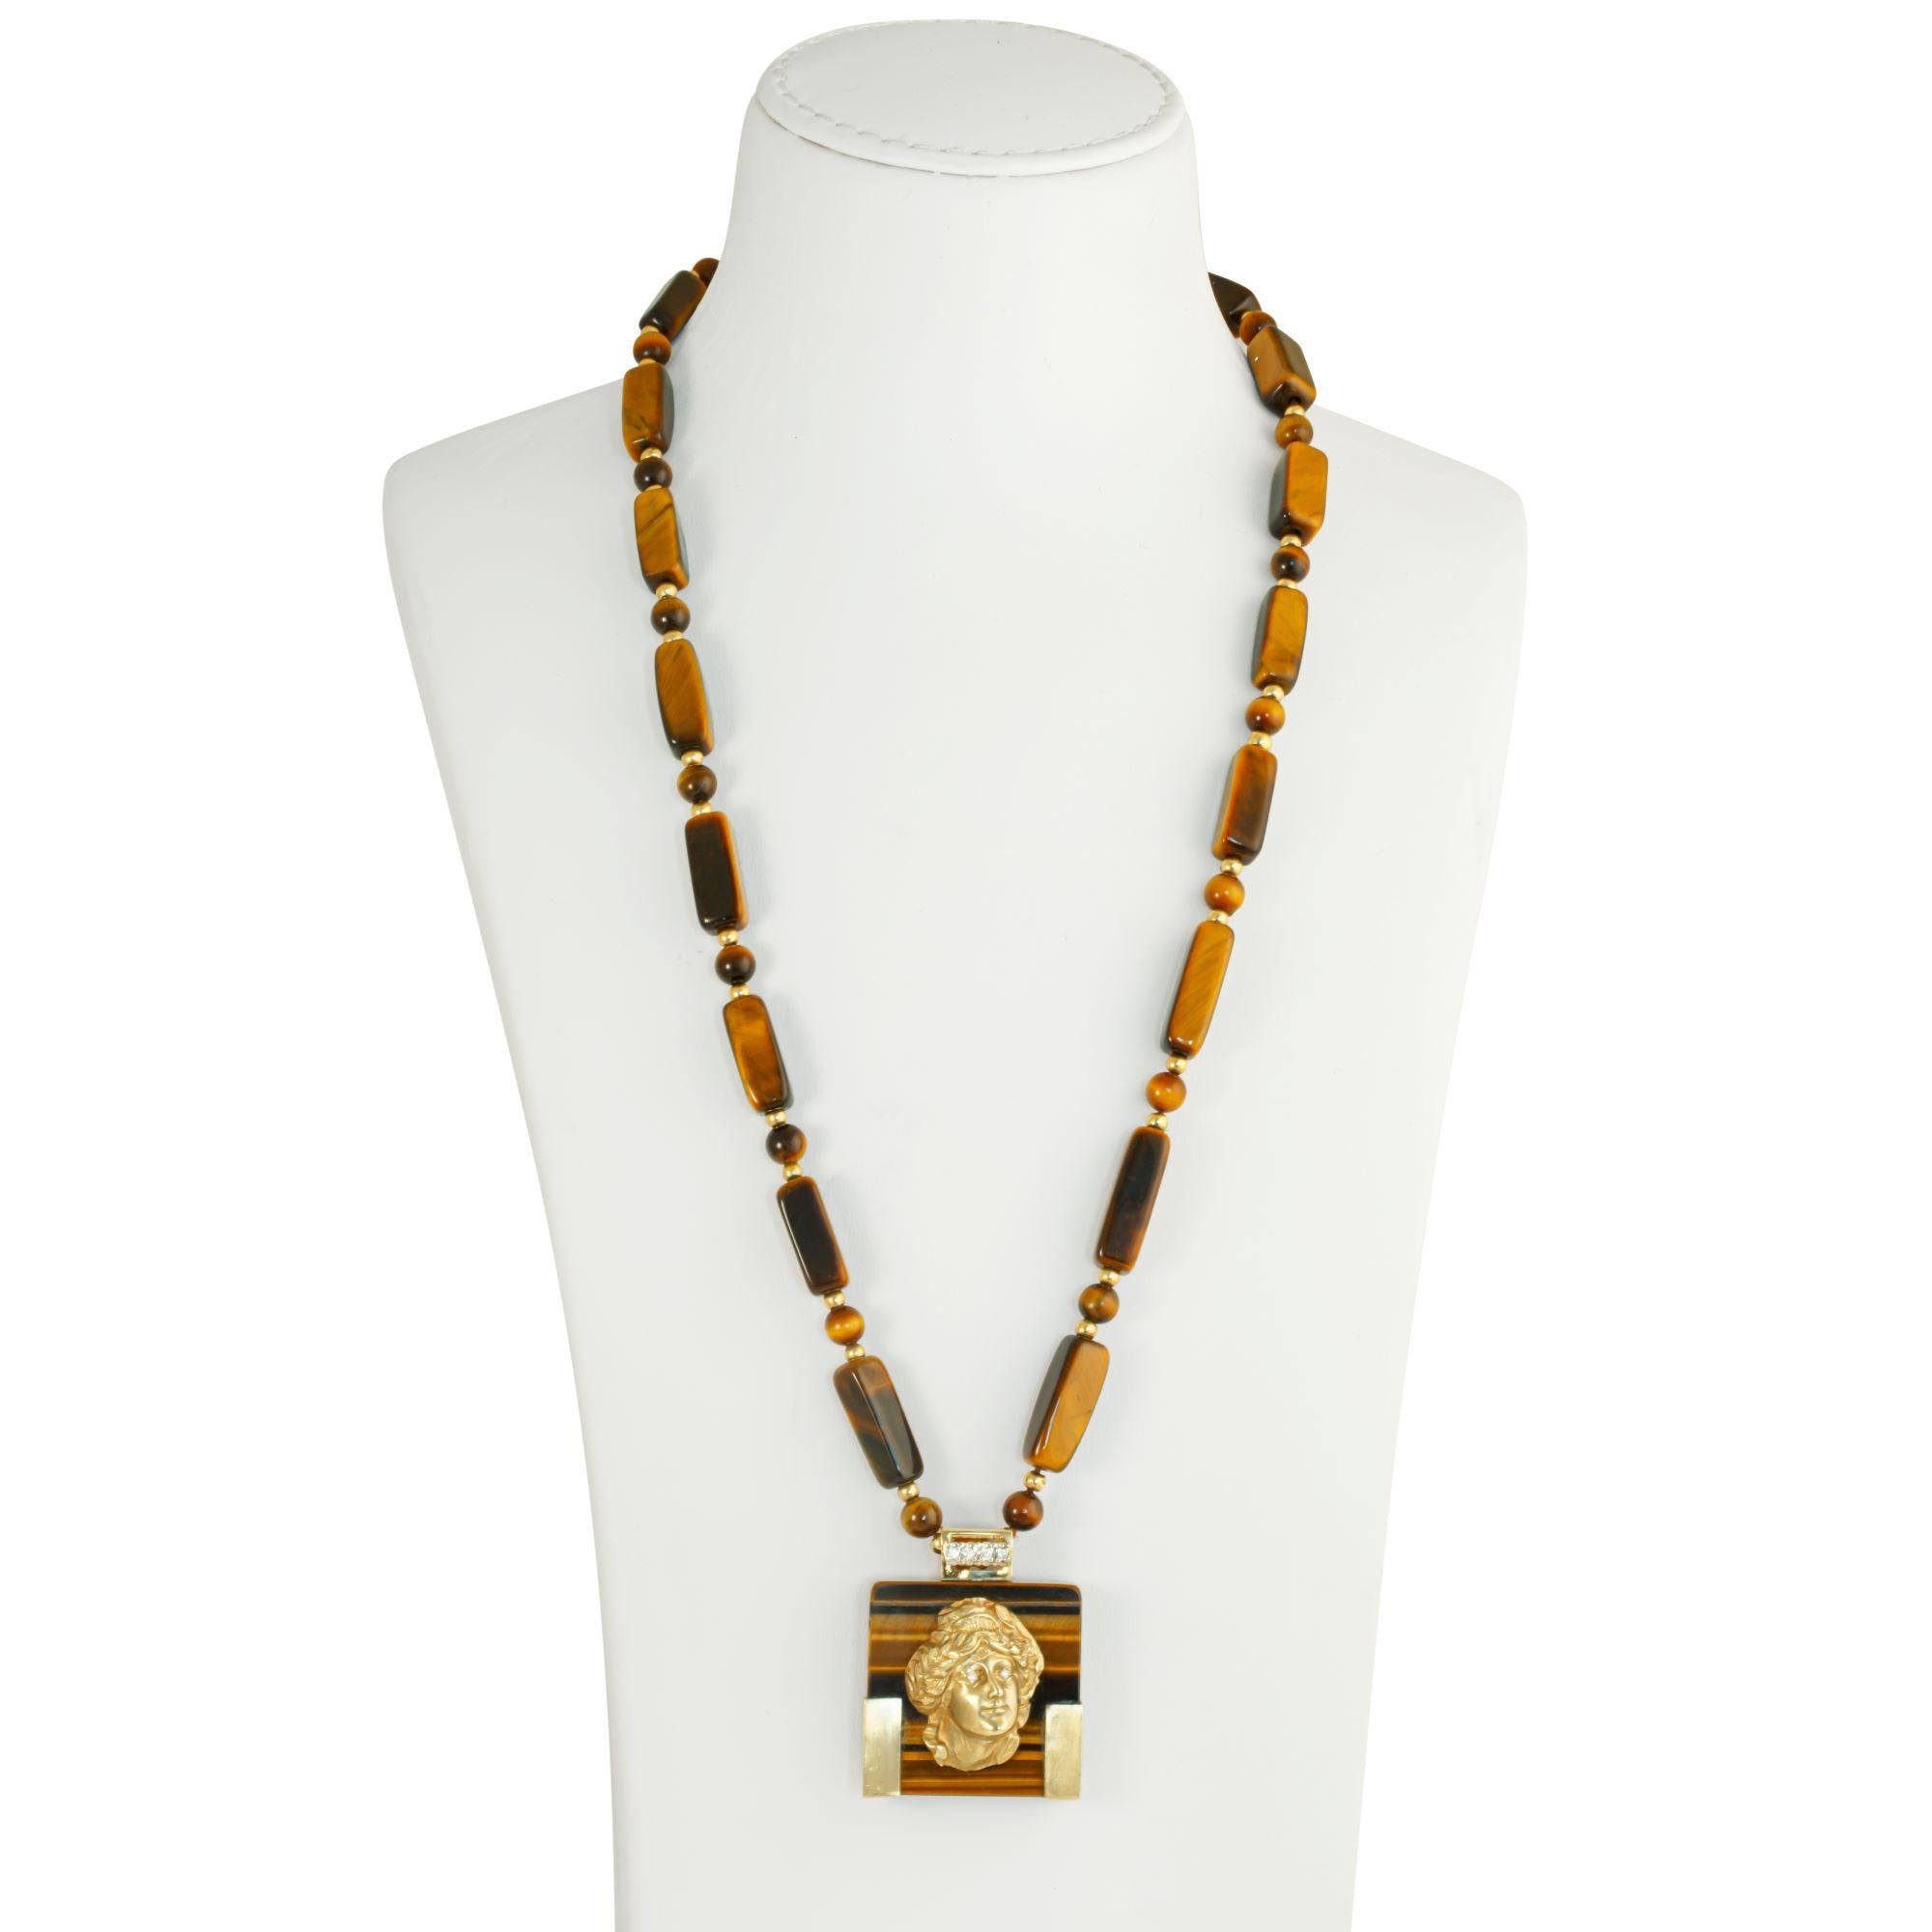 Women's or Men's Tiger Eye Necklace With Articulated 14ct Gold Portrait Pendant For Sale